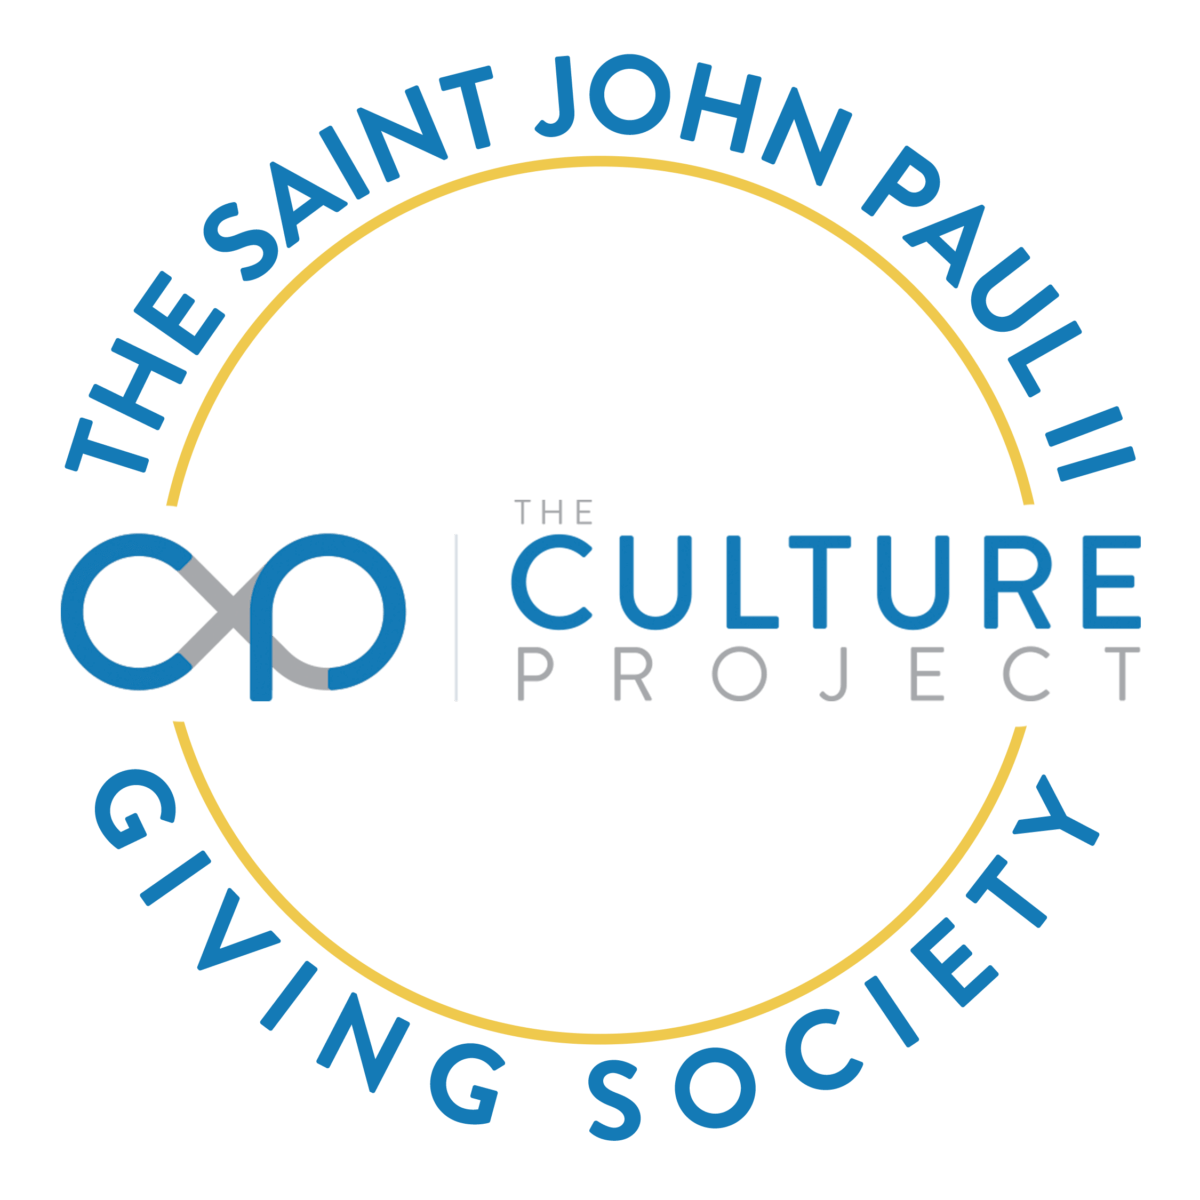 Donate to The Culture Project